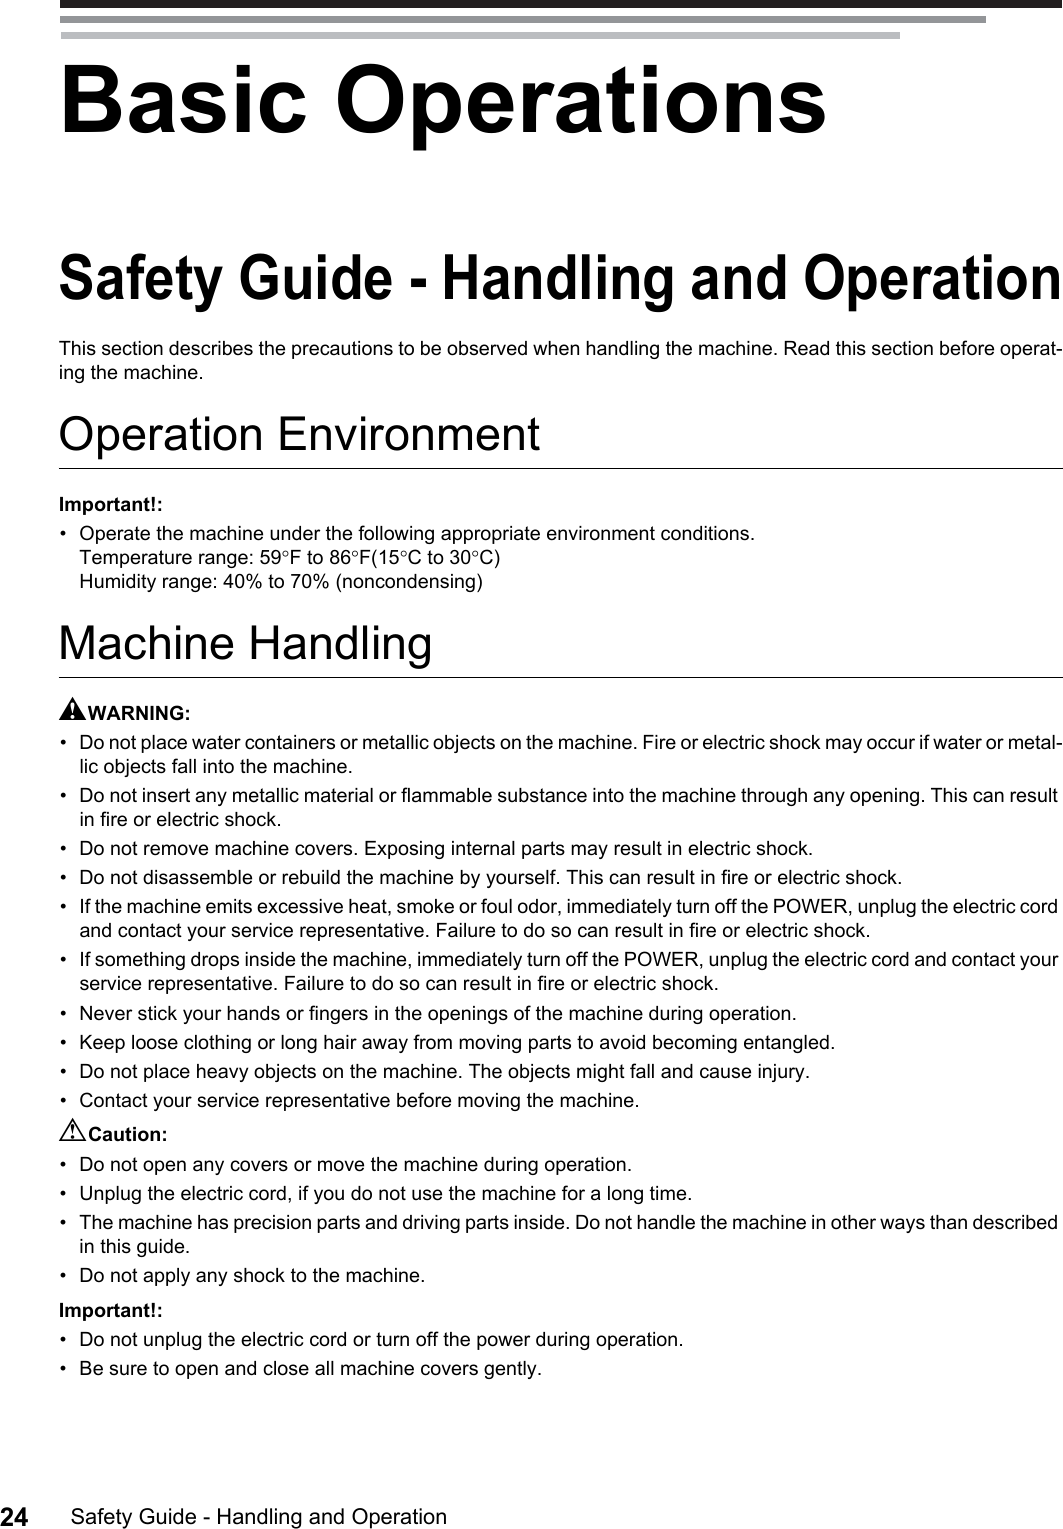 Safety Guide - Handling and Operation24Basic OperationsSafety Guide - Handling and OperationThis section describes the precautions to be observed when handling the machine. Read this section before operat-ing the machine.Operation EnvironmentImportant!:• Operate the machine under the following appropriate environment conditions.Temperature range: 59°F to 86°F(15°C to 30°C)Humidity range: 40% to 70% (noncondensing)Machine HandlingAWARNING:• Do not place water containers or metallic objects on the machine. Fire or electric shock may occur if water or metal-lic objects fall into the machine.• Do not insert any metallic material or flammable substance into the machine through any opening. This can result in fire or electric shock.• Do not remove machine covers. Exposing internal parts may result in electric shock.• Do not disassemble or rebuild the machine by yourself. This can result in fire or electric shock.• If the machine emits excessive heat, smoke or foul odor, immediately turn off the POWER, unplug the electric cord and contact your service representative. Failure to do so can result in fire or electric shock.• If something drops inside the machine, immediately turn off the POWER, unplug the electric cord and contact your service representative. Failure to do so can result in fire or electric shock.• Never stick your hands or fingers in the openings of the machine during operation.• Keep loose clothing or long hair away from moving parts to avoid becoming entangled.• Do not place heavy objects on the machine. The objects might fall and cause injury.• Contact your service representative before moving the machine.BCaution:• Do not open any covers or move the machine during operation.• Unplug the electric cord, if you do not use the machine for a long time.• The machine has precision parts and driving parts inside. Do not handle the machine in other ways than described in this guide.• Do not apply any shock to the machine.Important!:• Do not unplug the electric cord or turn off the power during operation.• Be sure to open and close all machine covers gently.